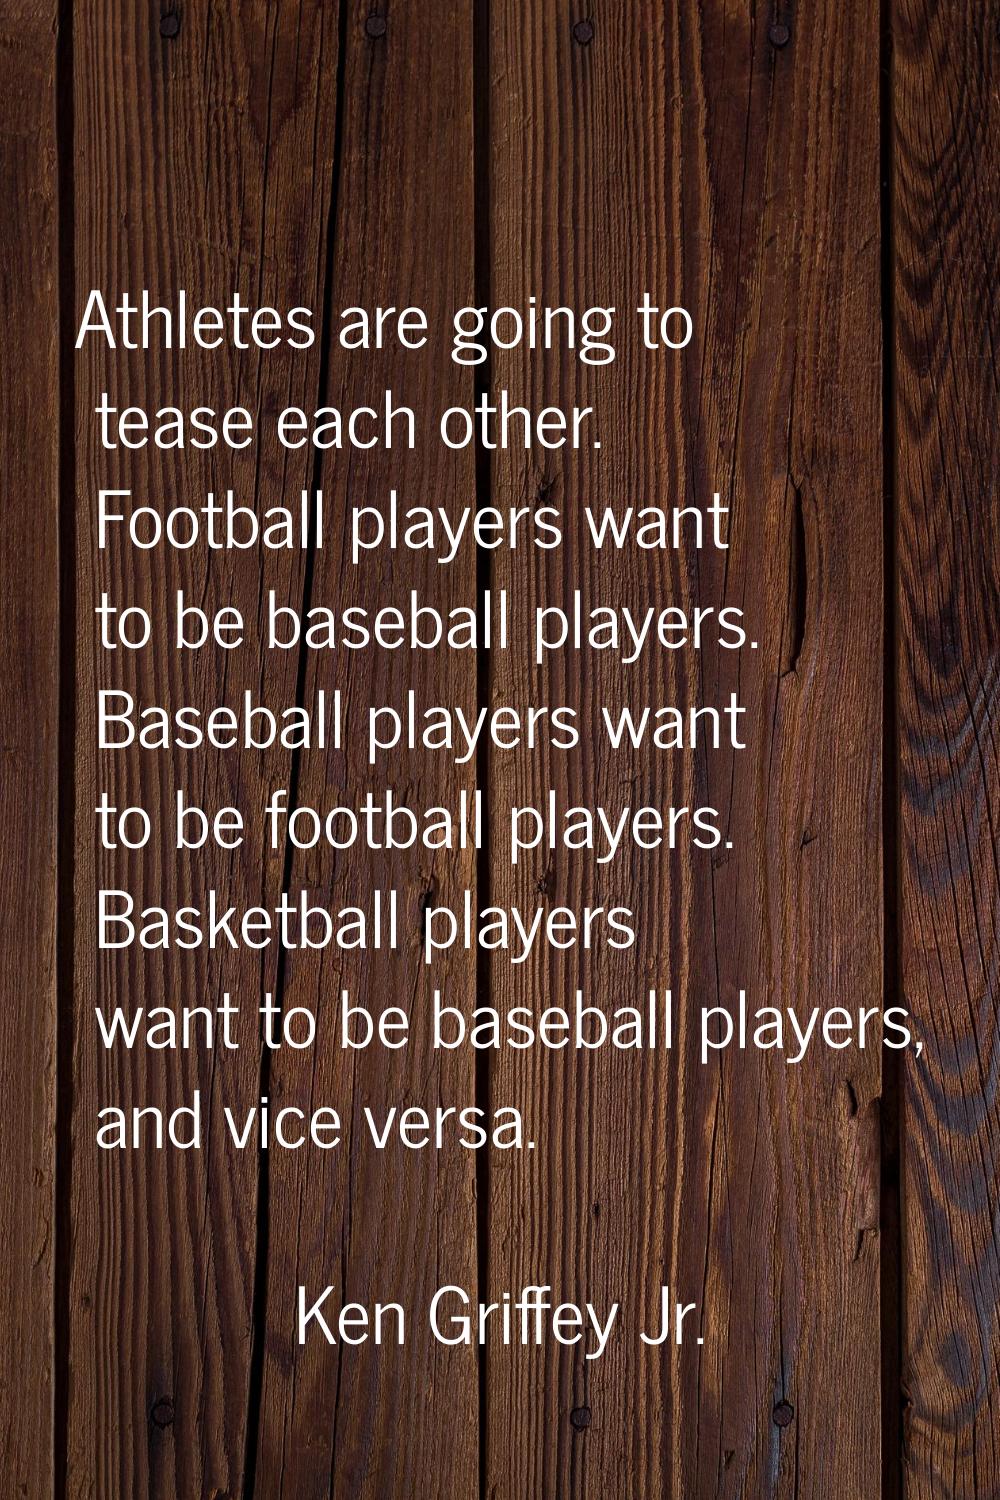 Athletes are going to tease each other. Football players want to be baseball players. Baseball play